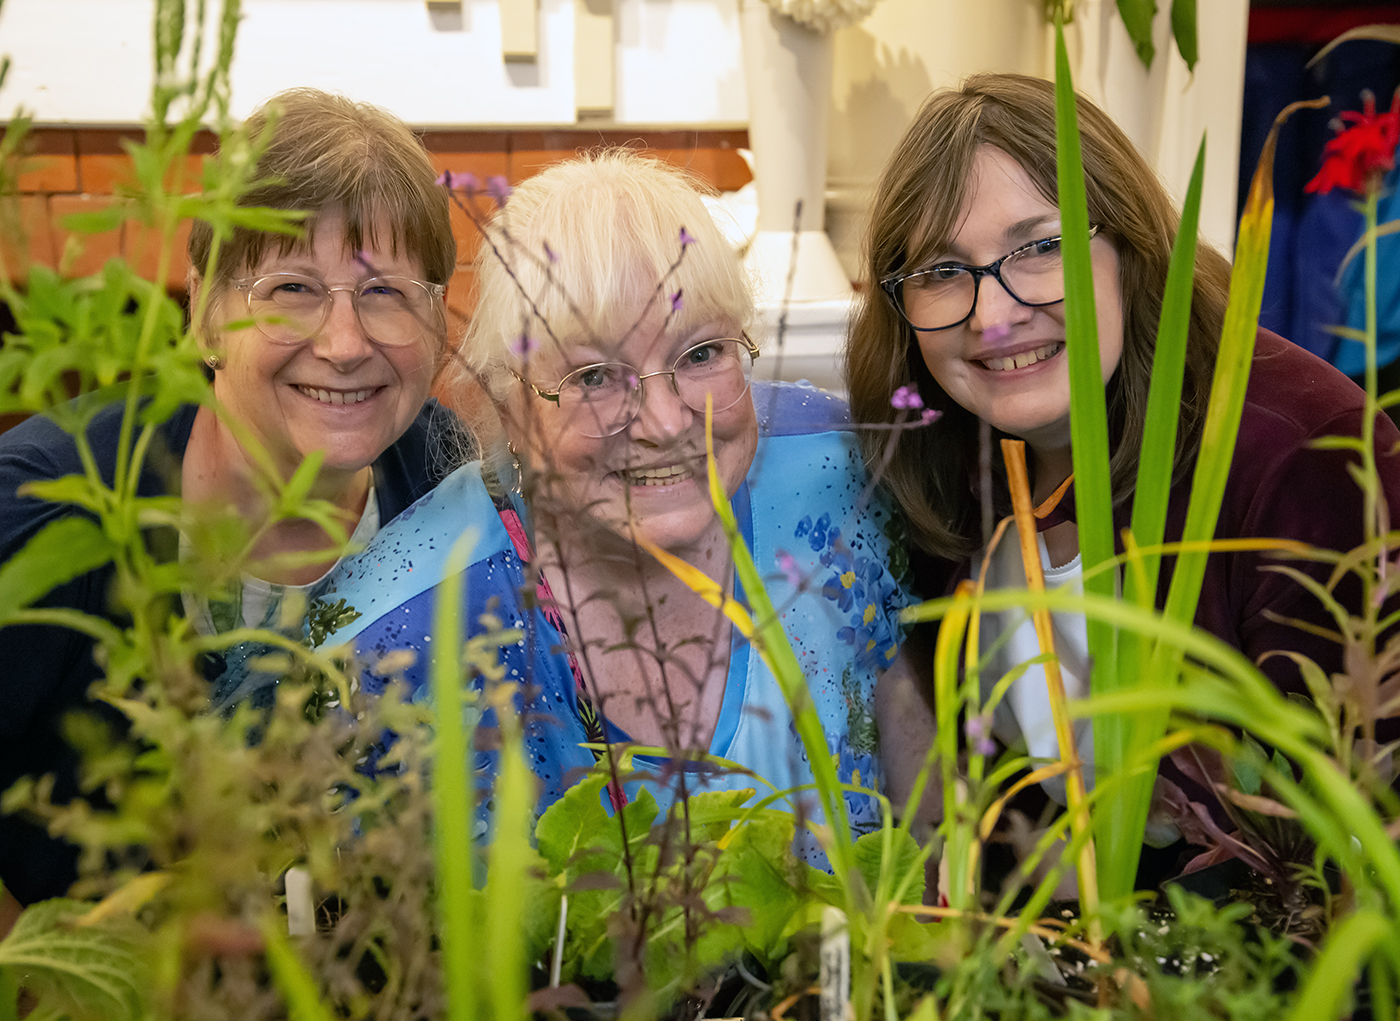 The happy, friendly faces at the plant stall that greet visitors in the entrance hall. Sian Sharp, Maggie Rogers and Diane McGrattan